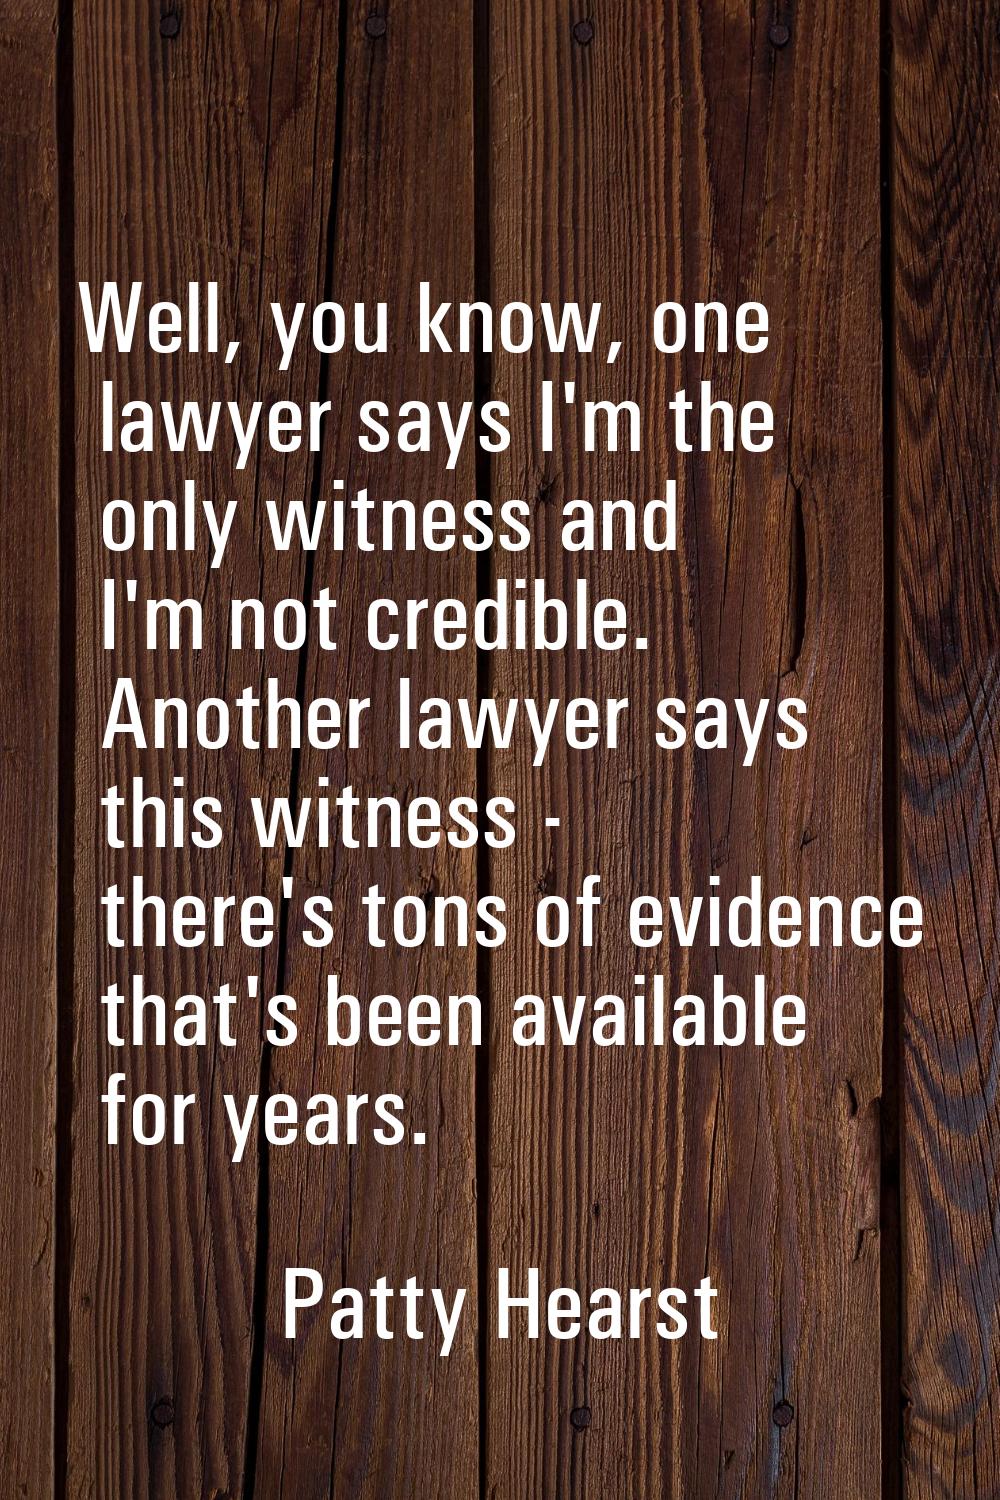 Well, you know, one lawyer says I'm the only witness and I'm not credible. Another lawyer says this